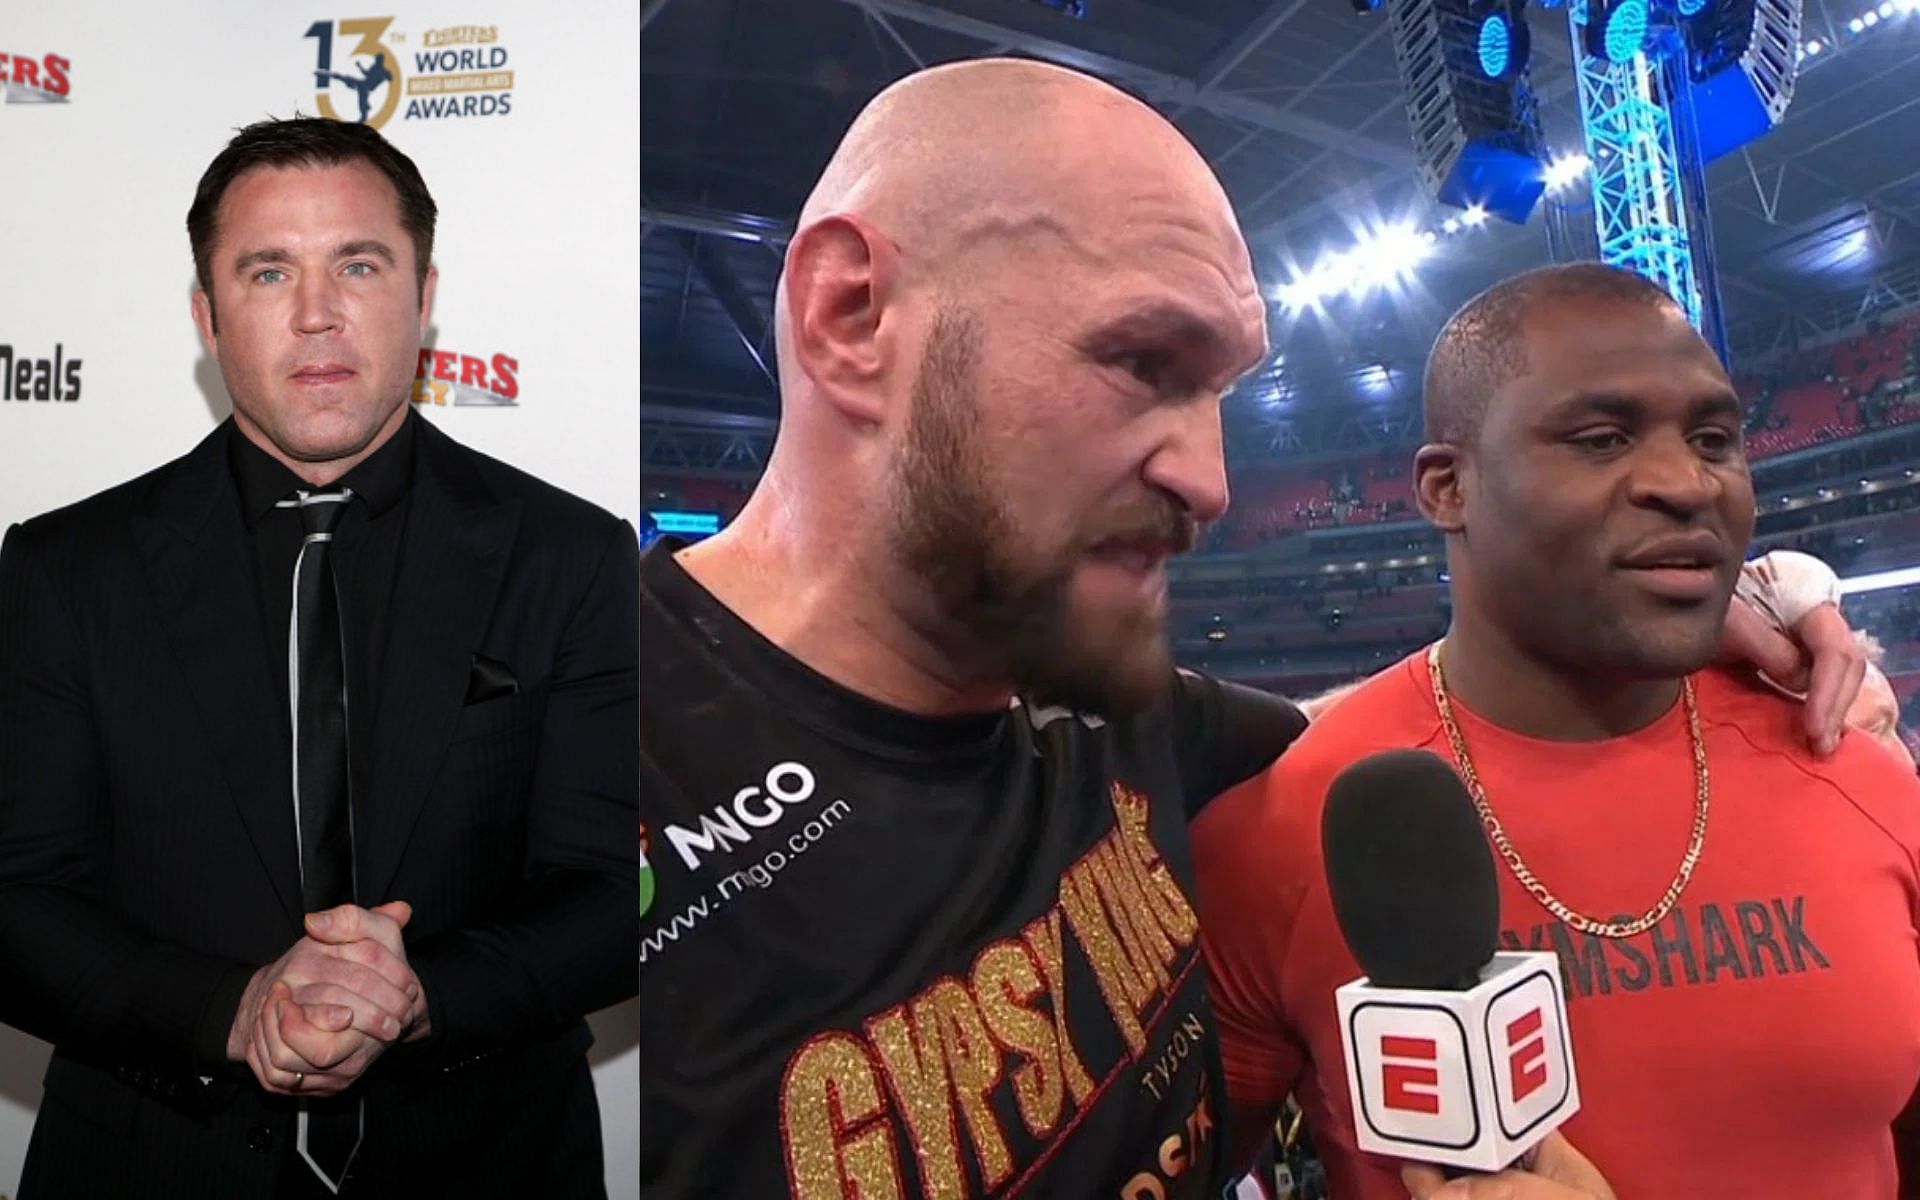 From left to right: Chael Sonnen, Tyson Fury and Francis Ngannou [Image Courtesy: @MichaelBensonn on Twitter]